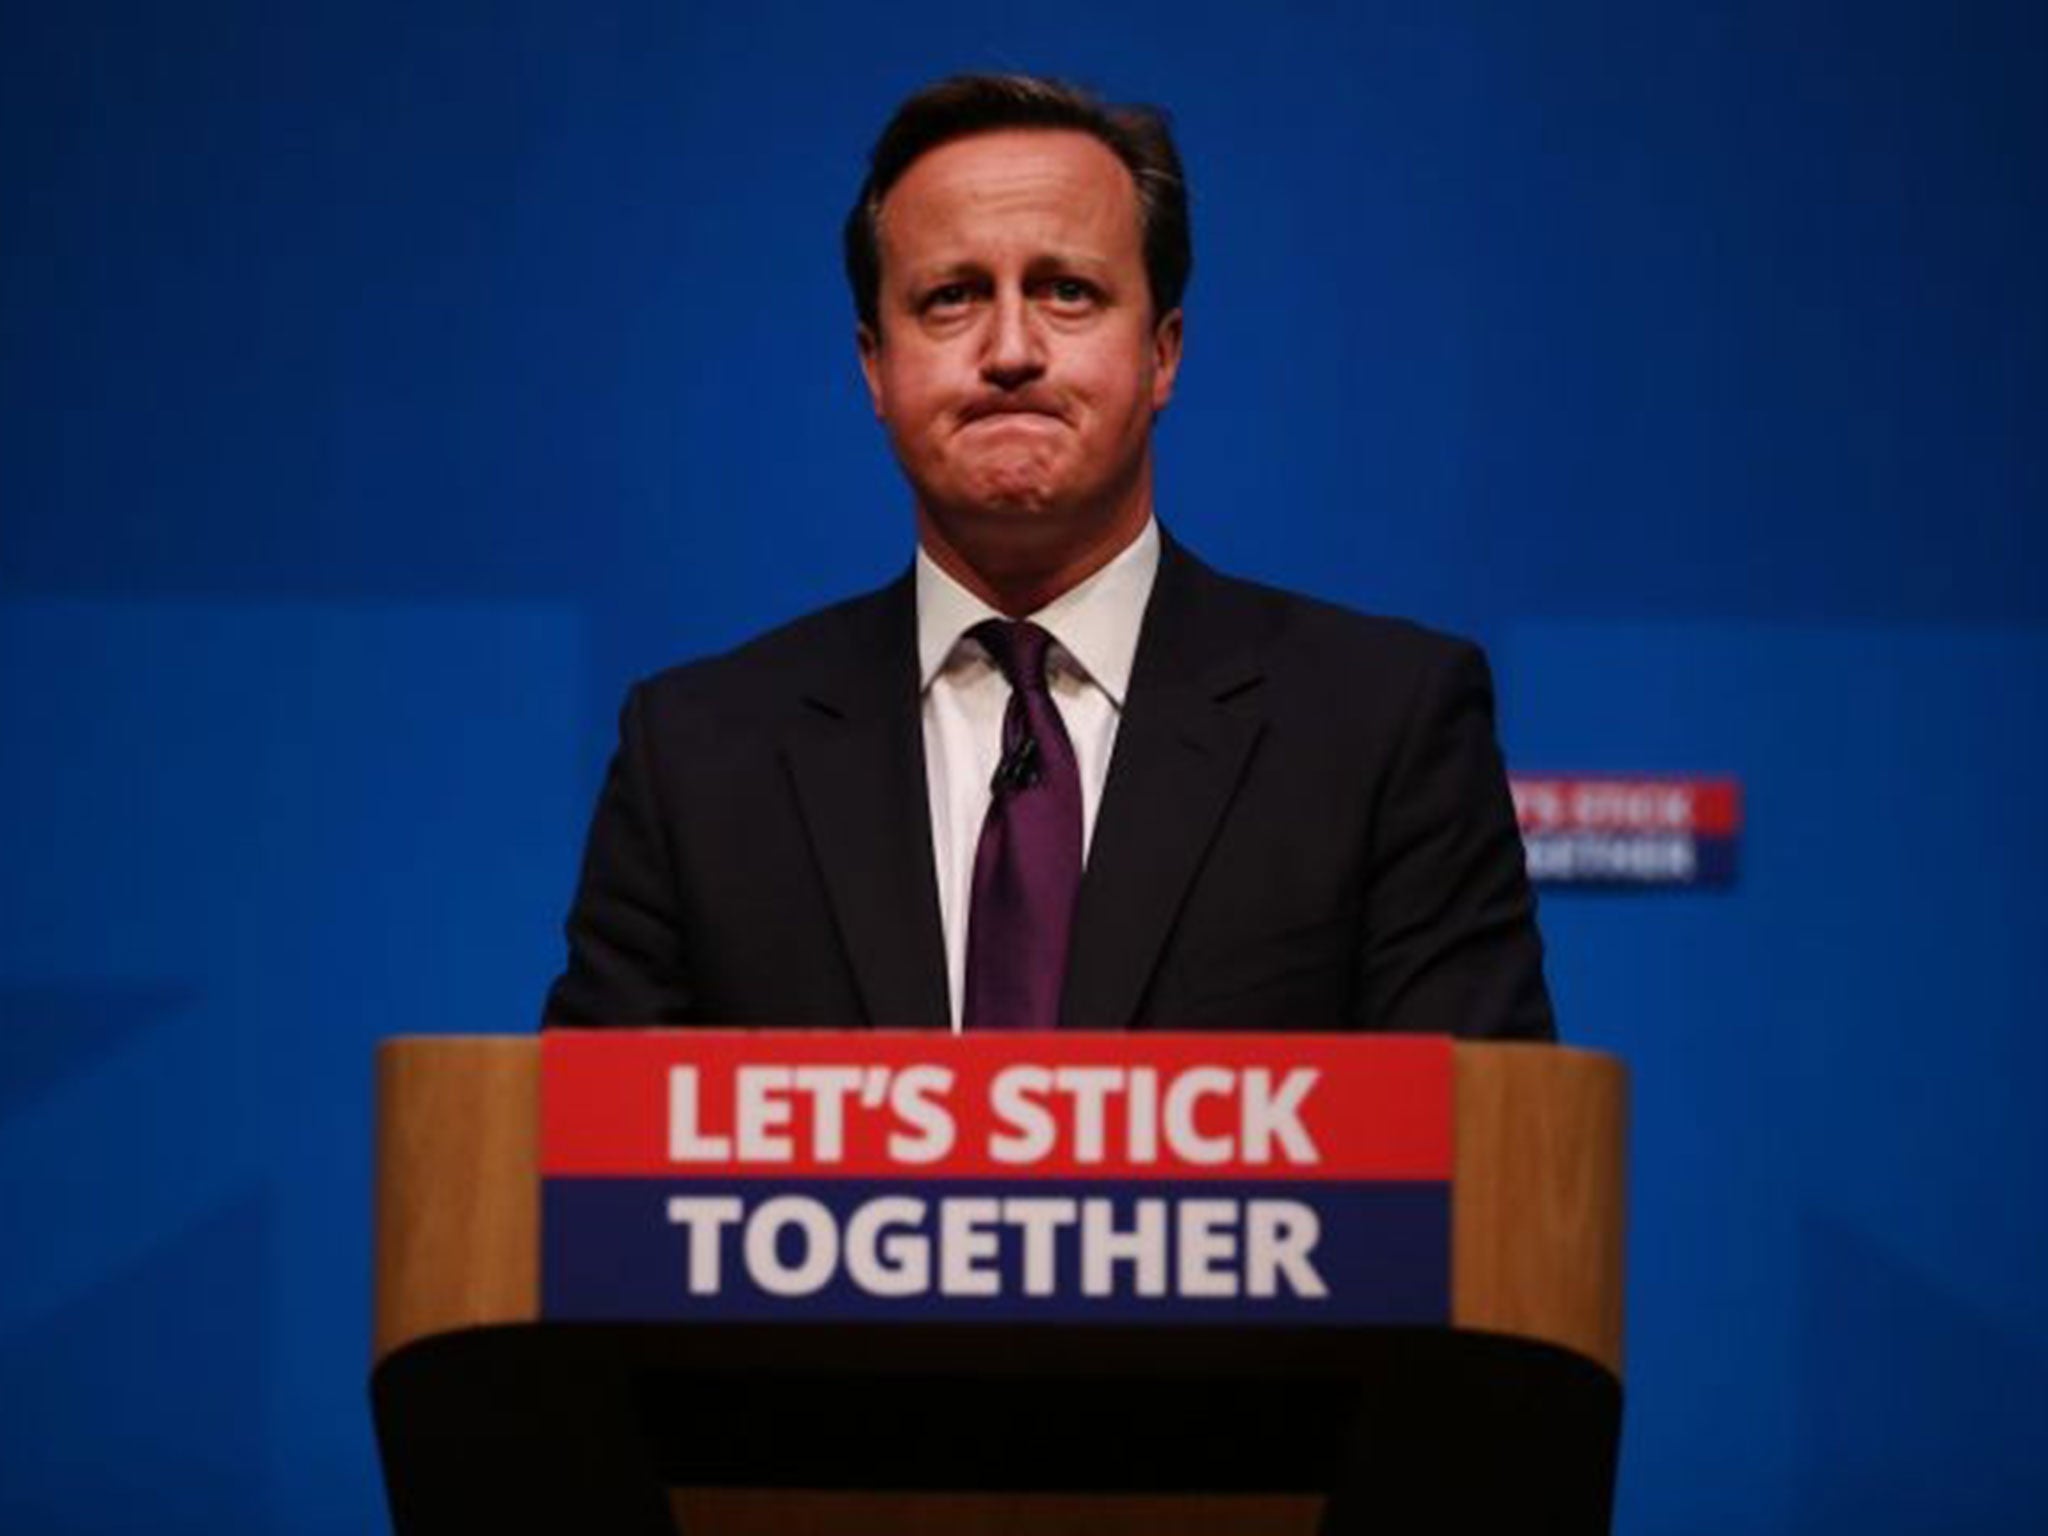 David Cameron addresses No campagn supporters in Aberdeen